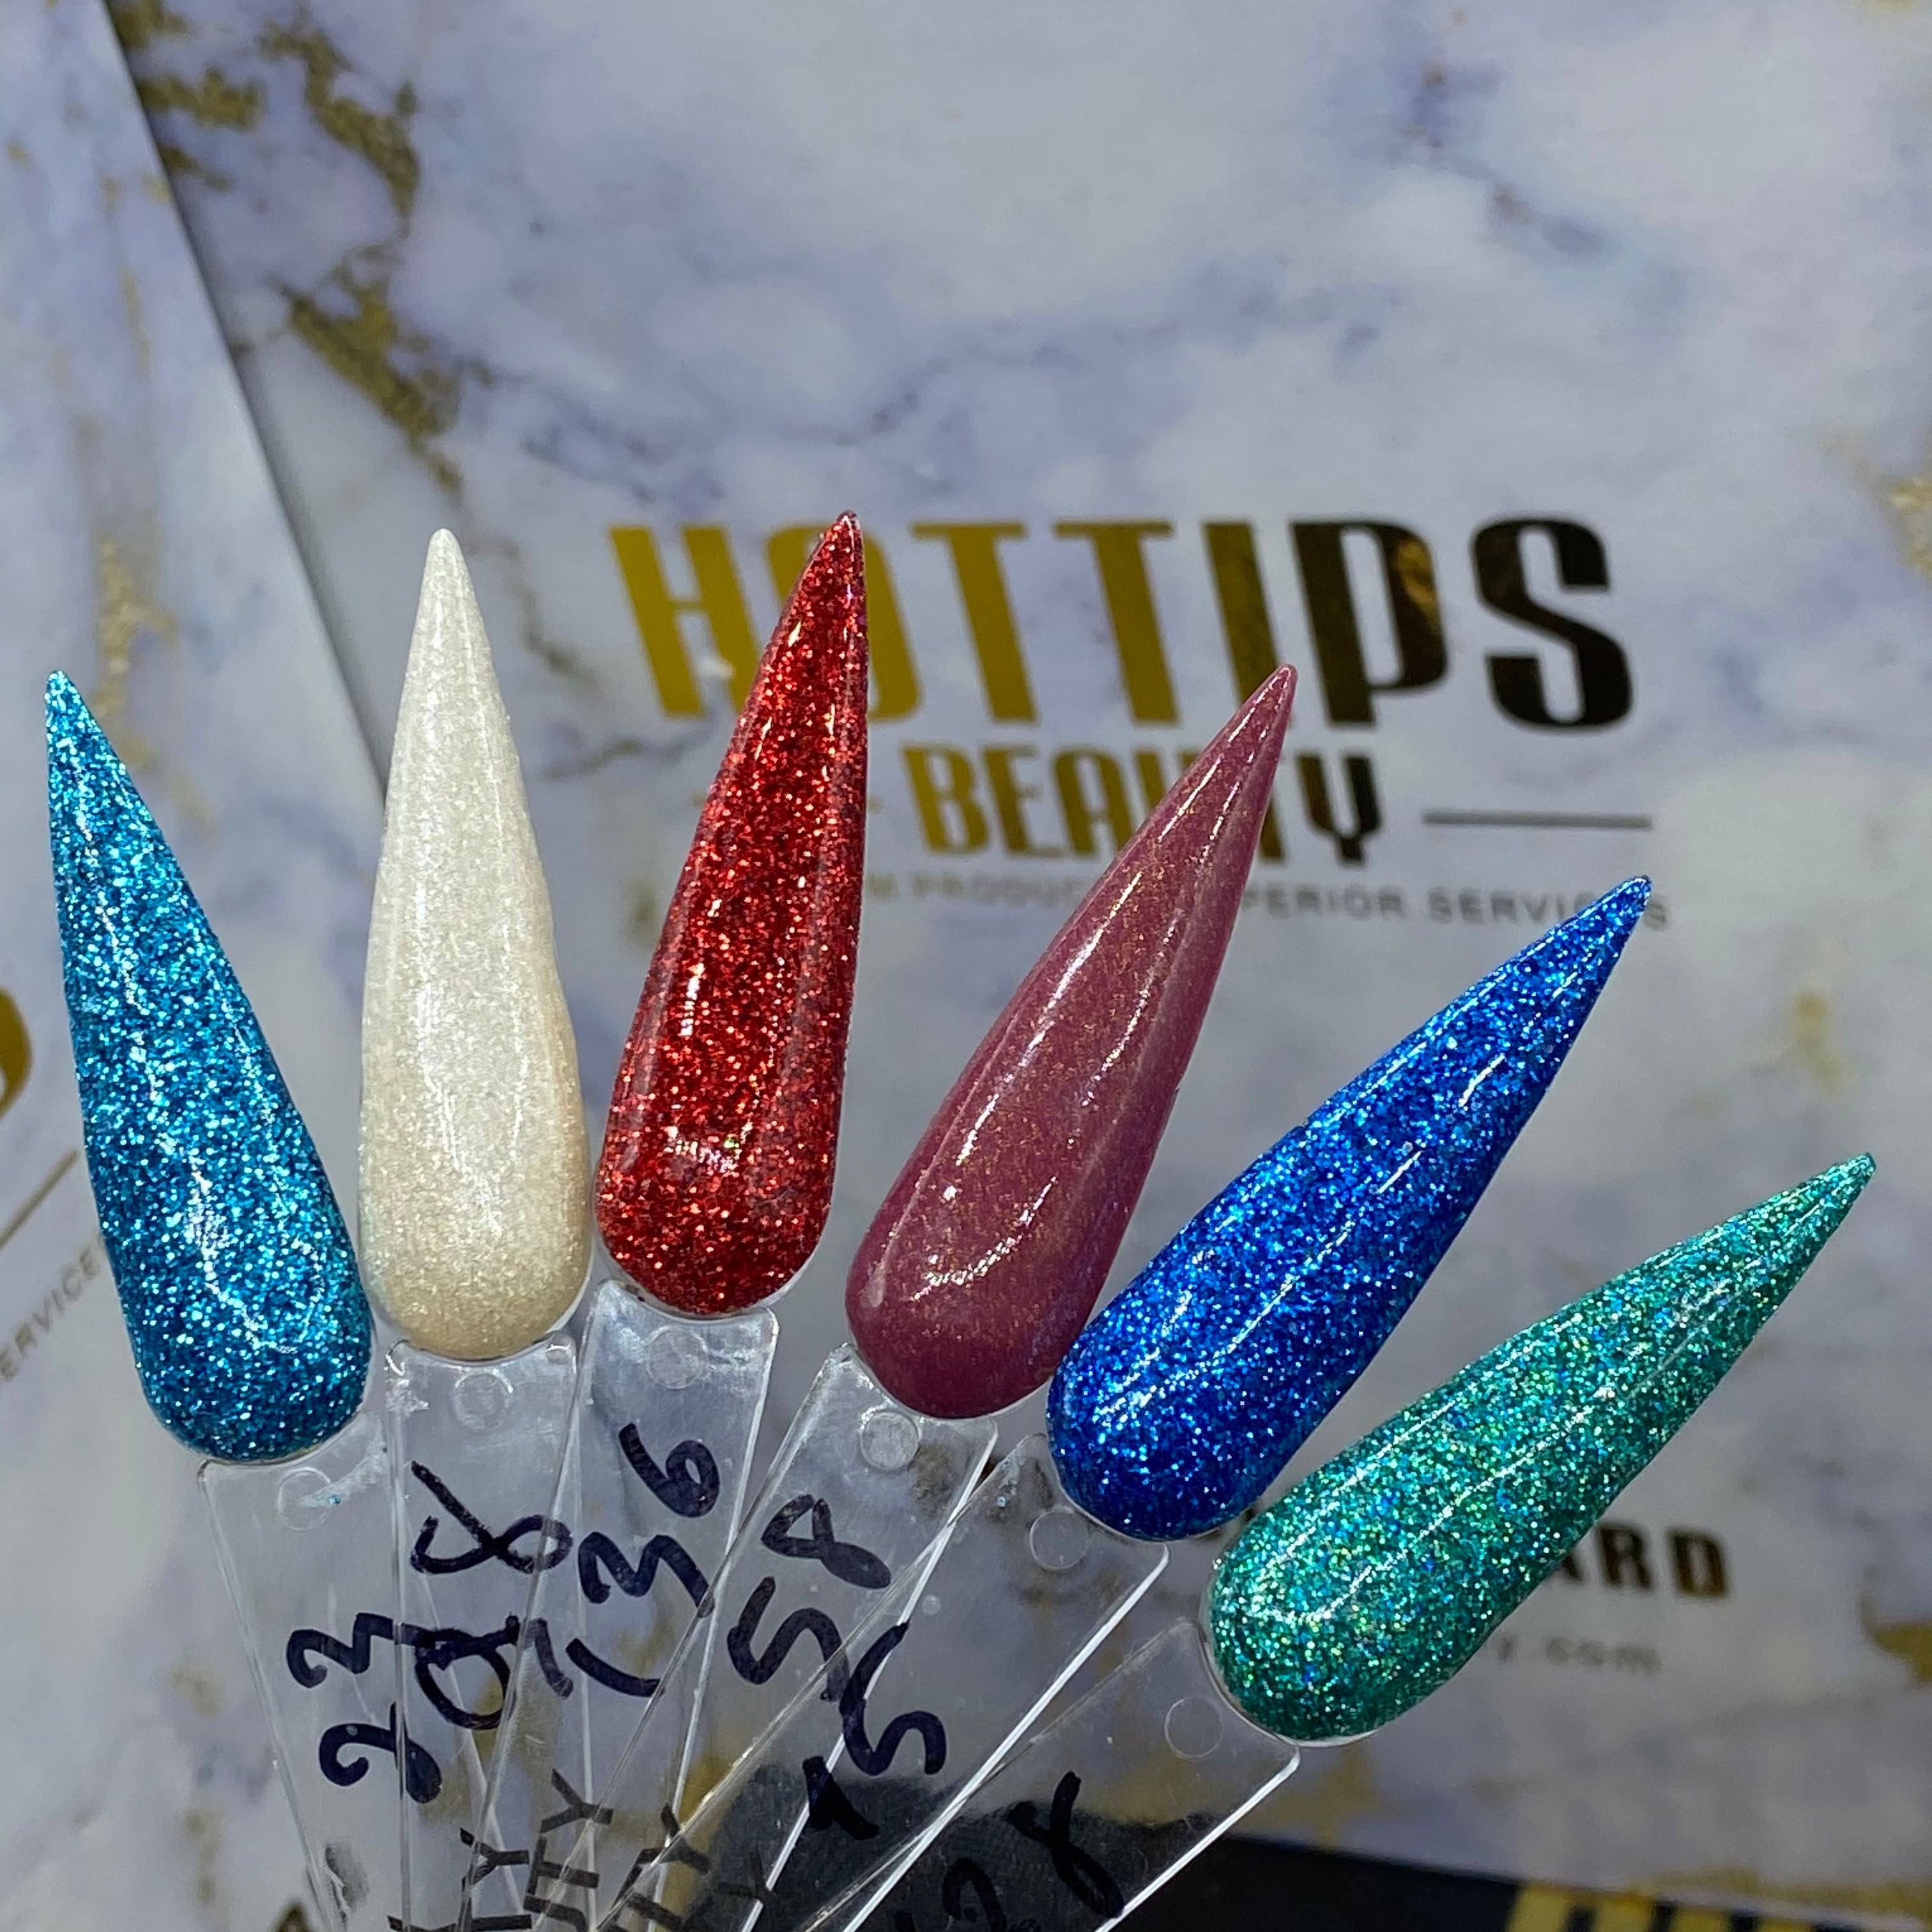 Acrylic Glitter Collection 1 ( 6 colors #23; 98; 136; 58; 15; 128)